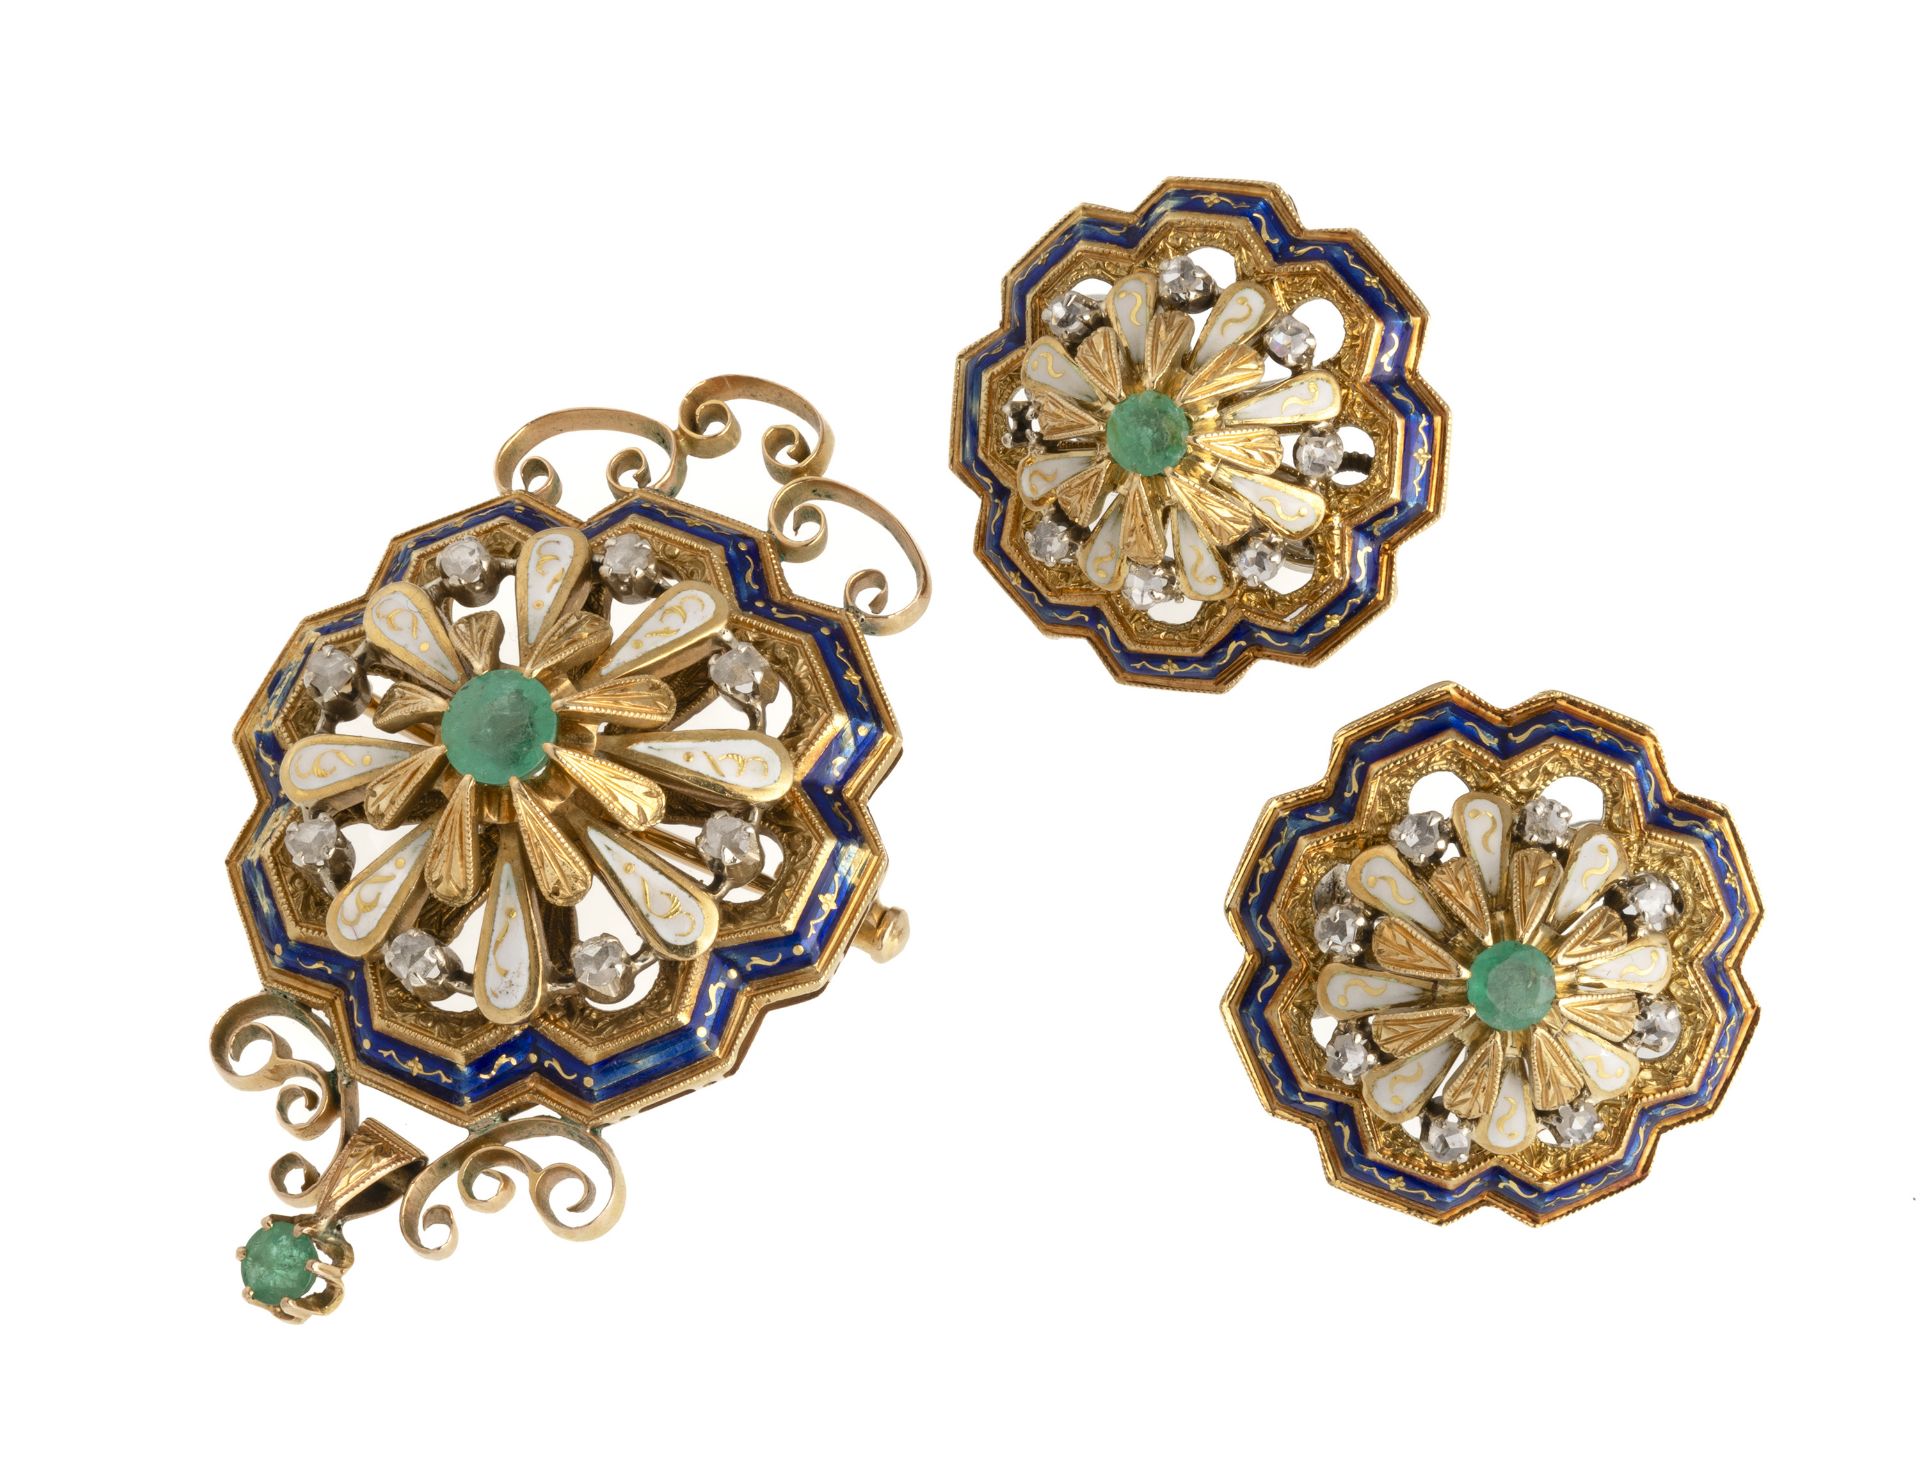 SET OF GOLD EARRINGS AND BROOCH WITH EMERALDS DIAMONDS AND ENAMELS